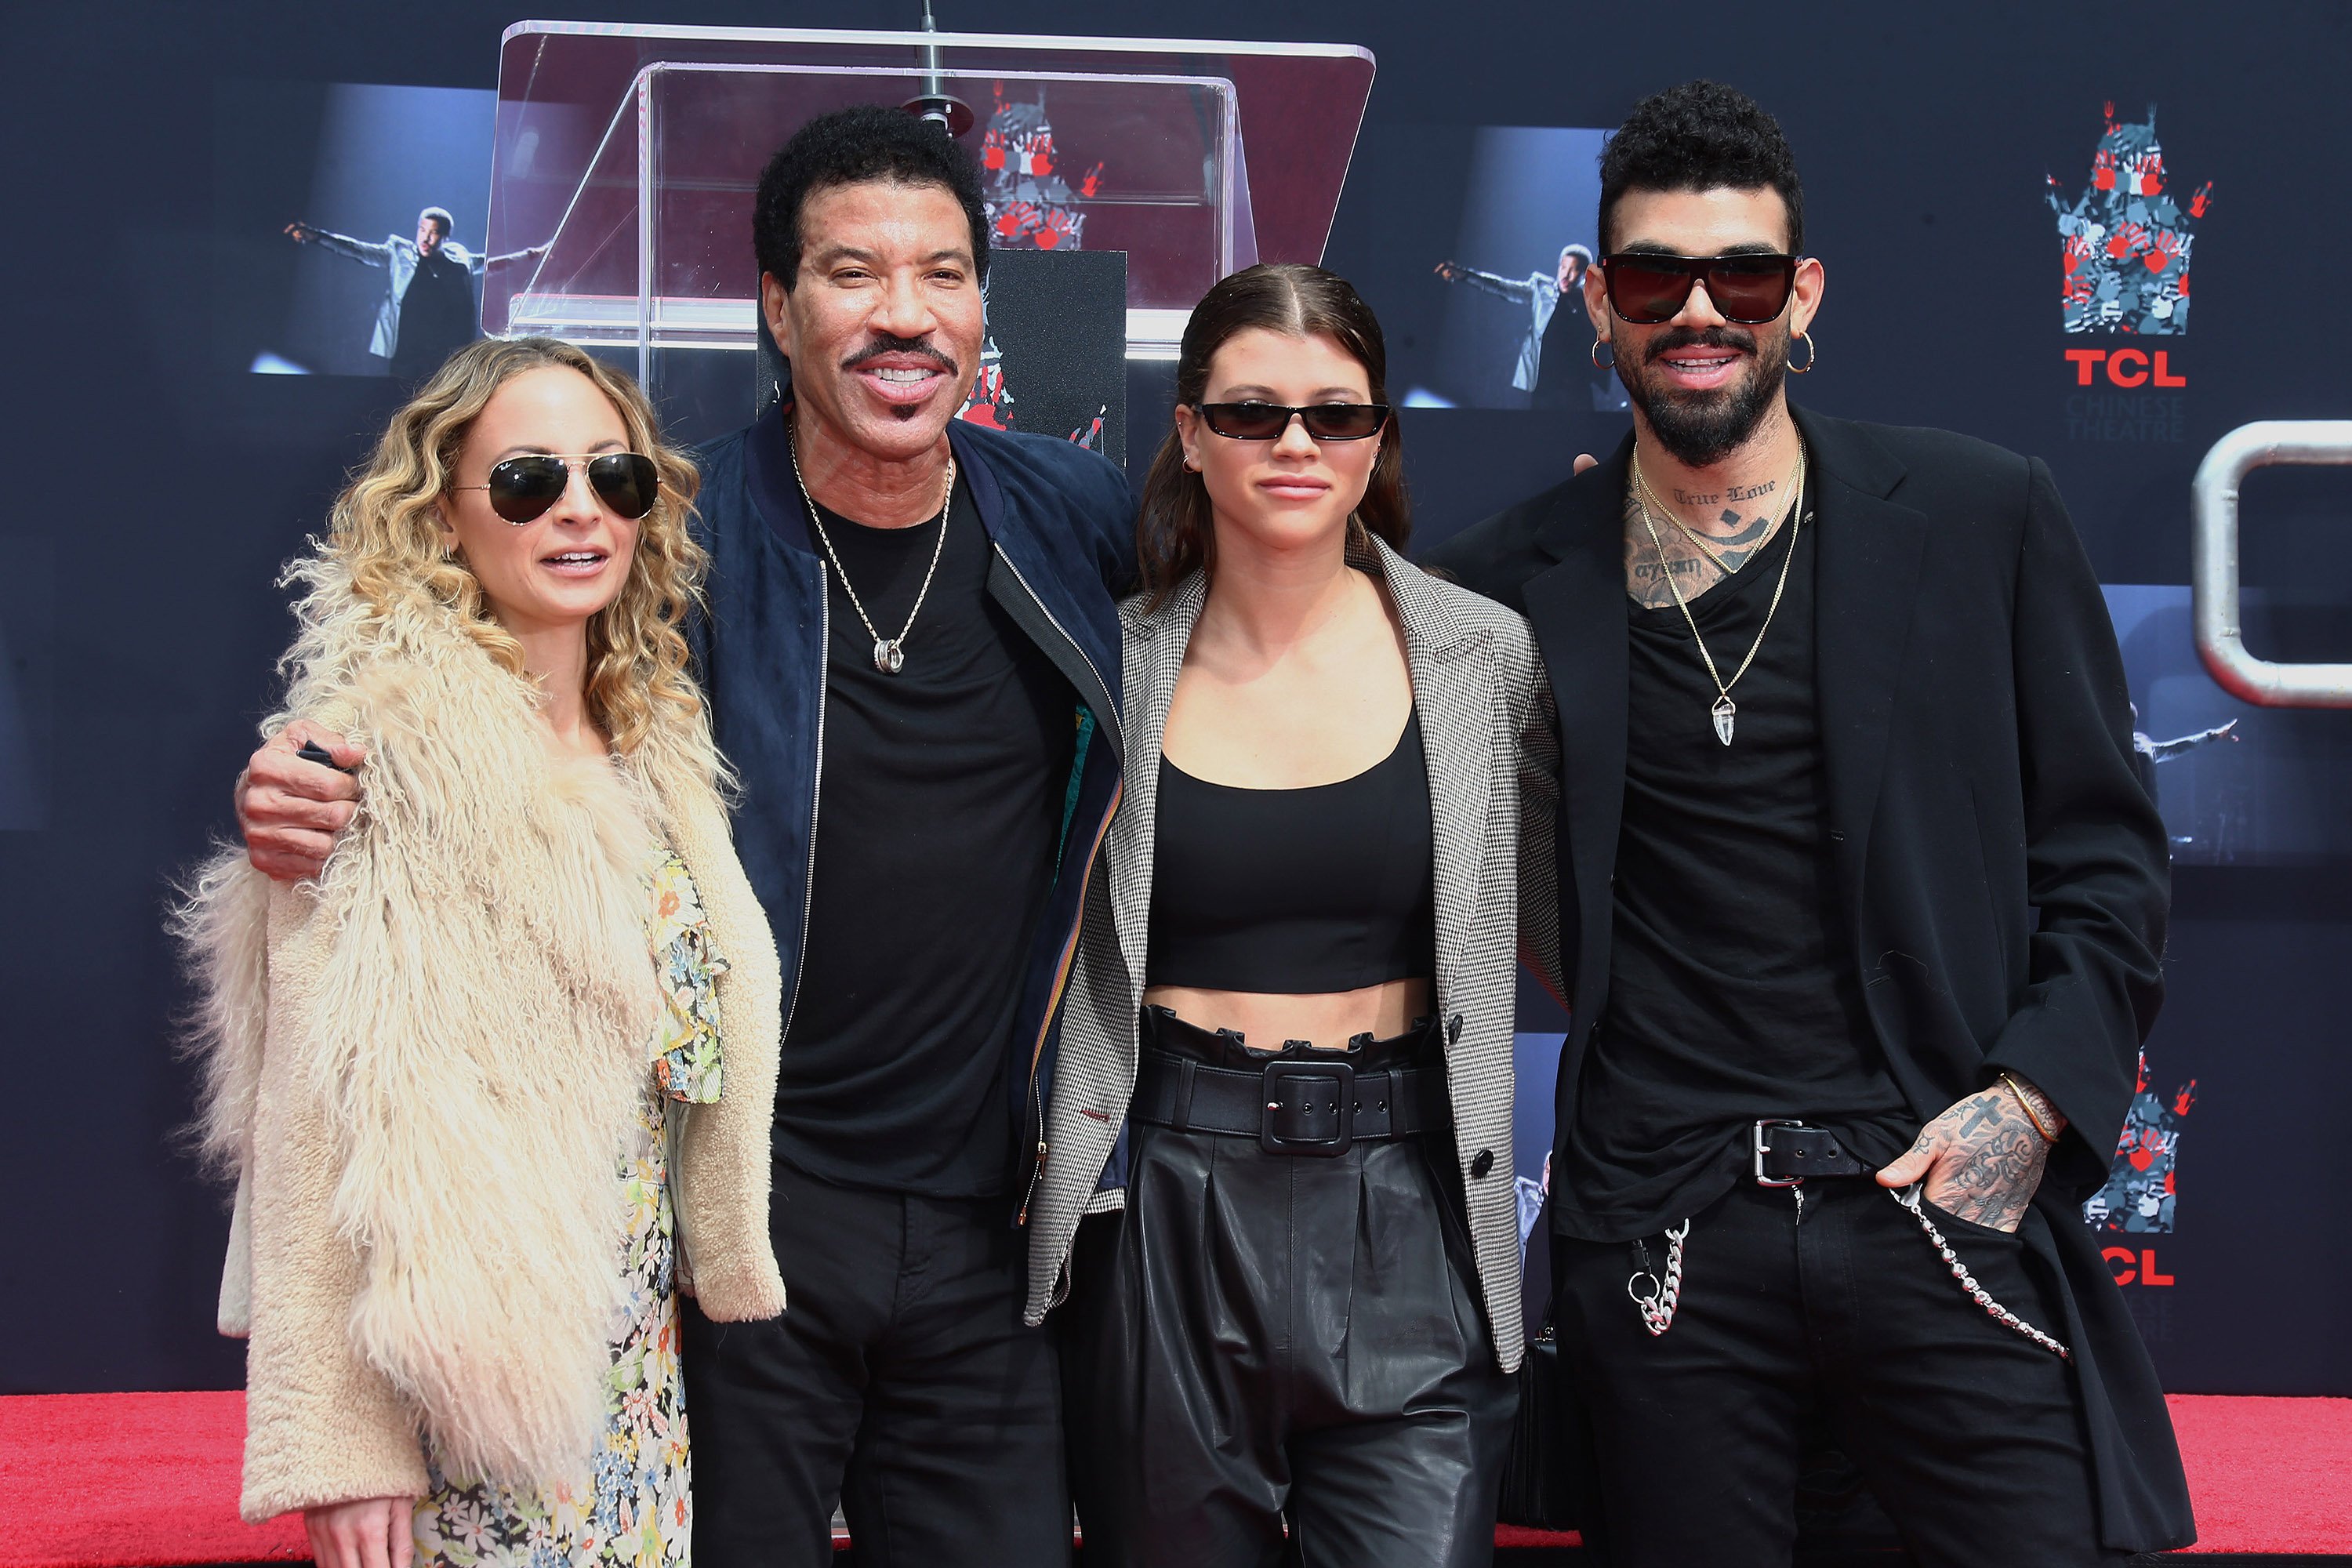 Nicole Richie, Lionel Richie, Sofia Richie and Miles Richie attend the Lionel Richie Hand And Footprint Ceremony at TCL Chinese Theatre on March 7, 2018 | Photo: GettyImages